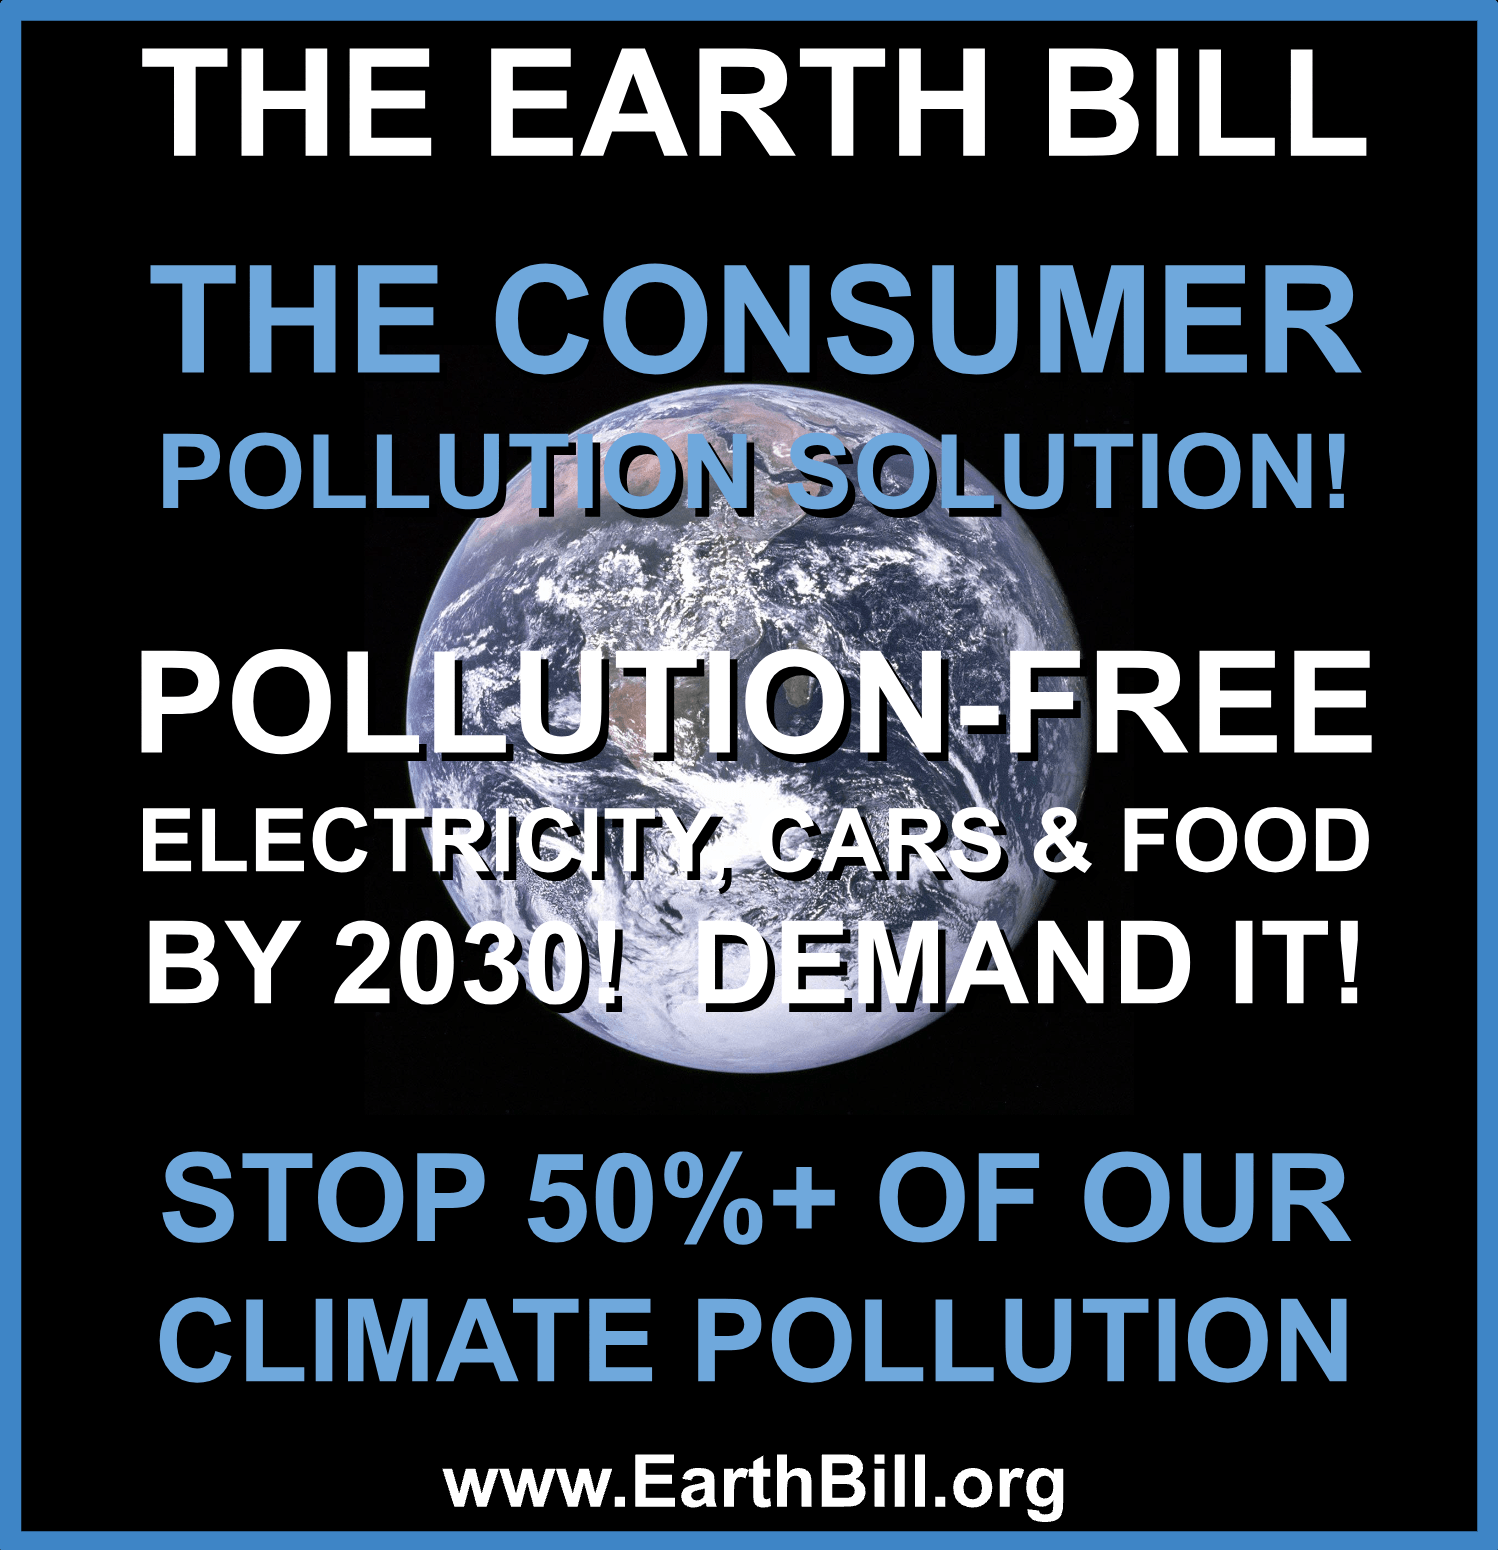 The Earth Bill. The consumer pollution solution. Pollution-free electricity, cars, and food by 2030! Demand it! Stop 50%+ of our climate pollution. www.earthbill.org